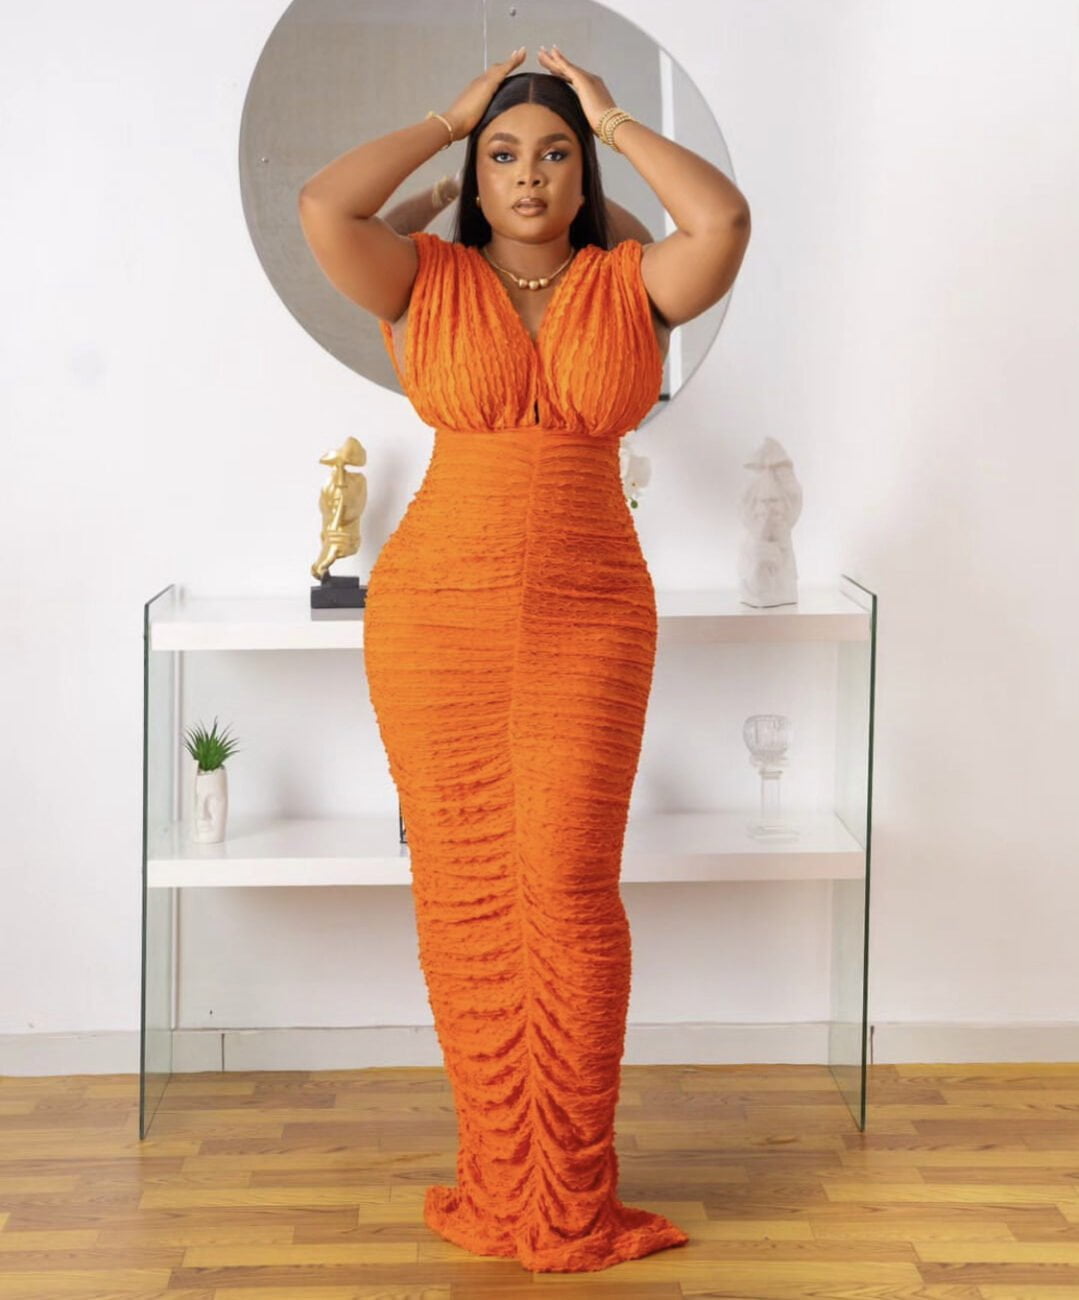 Bimbo Ademoye in a lovely orange dress that is suited for wednesdays.